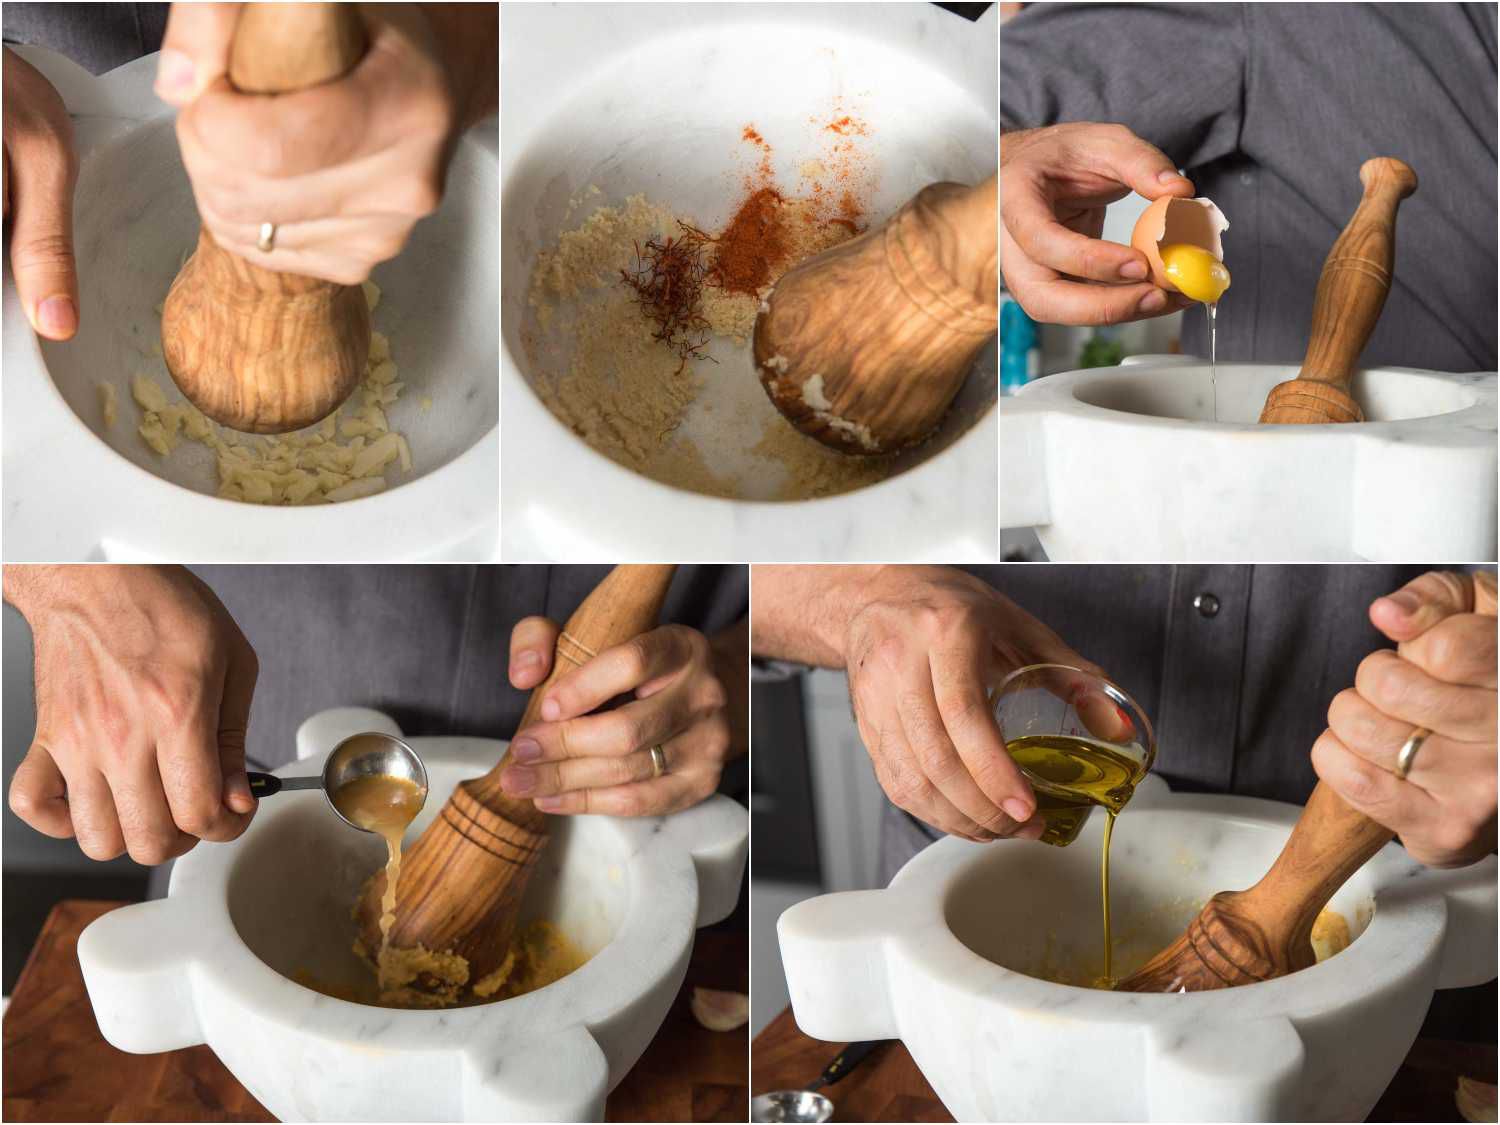 A collage of making rouille with a mortar and pestle: pounding garlic, cayenne pepper, bread crumbs, egg yolk, fish stock and olive oil into a thick paste.